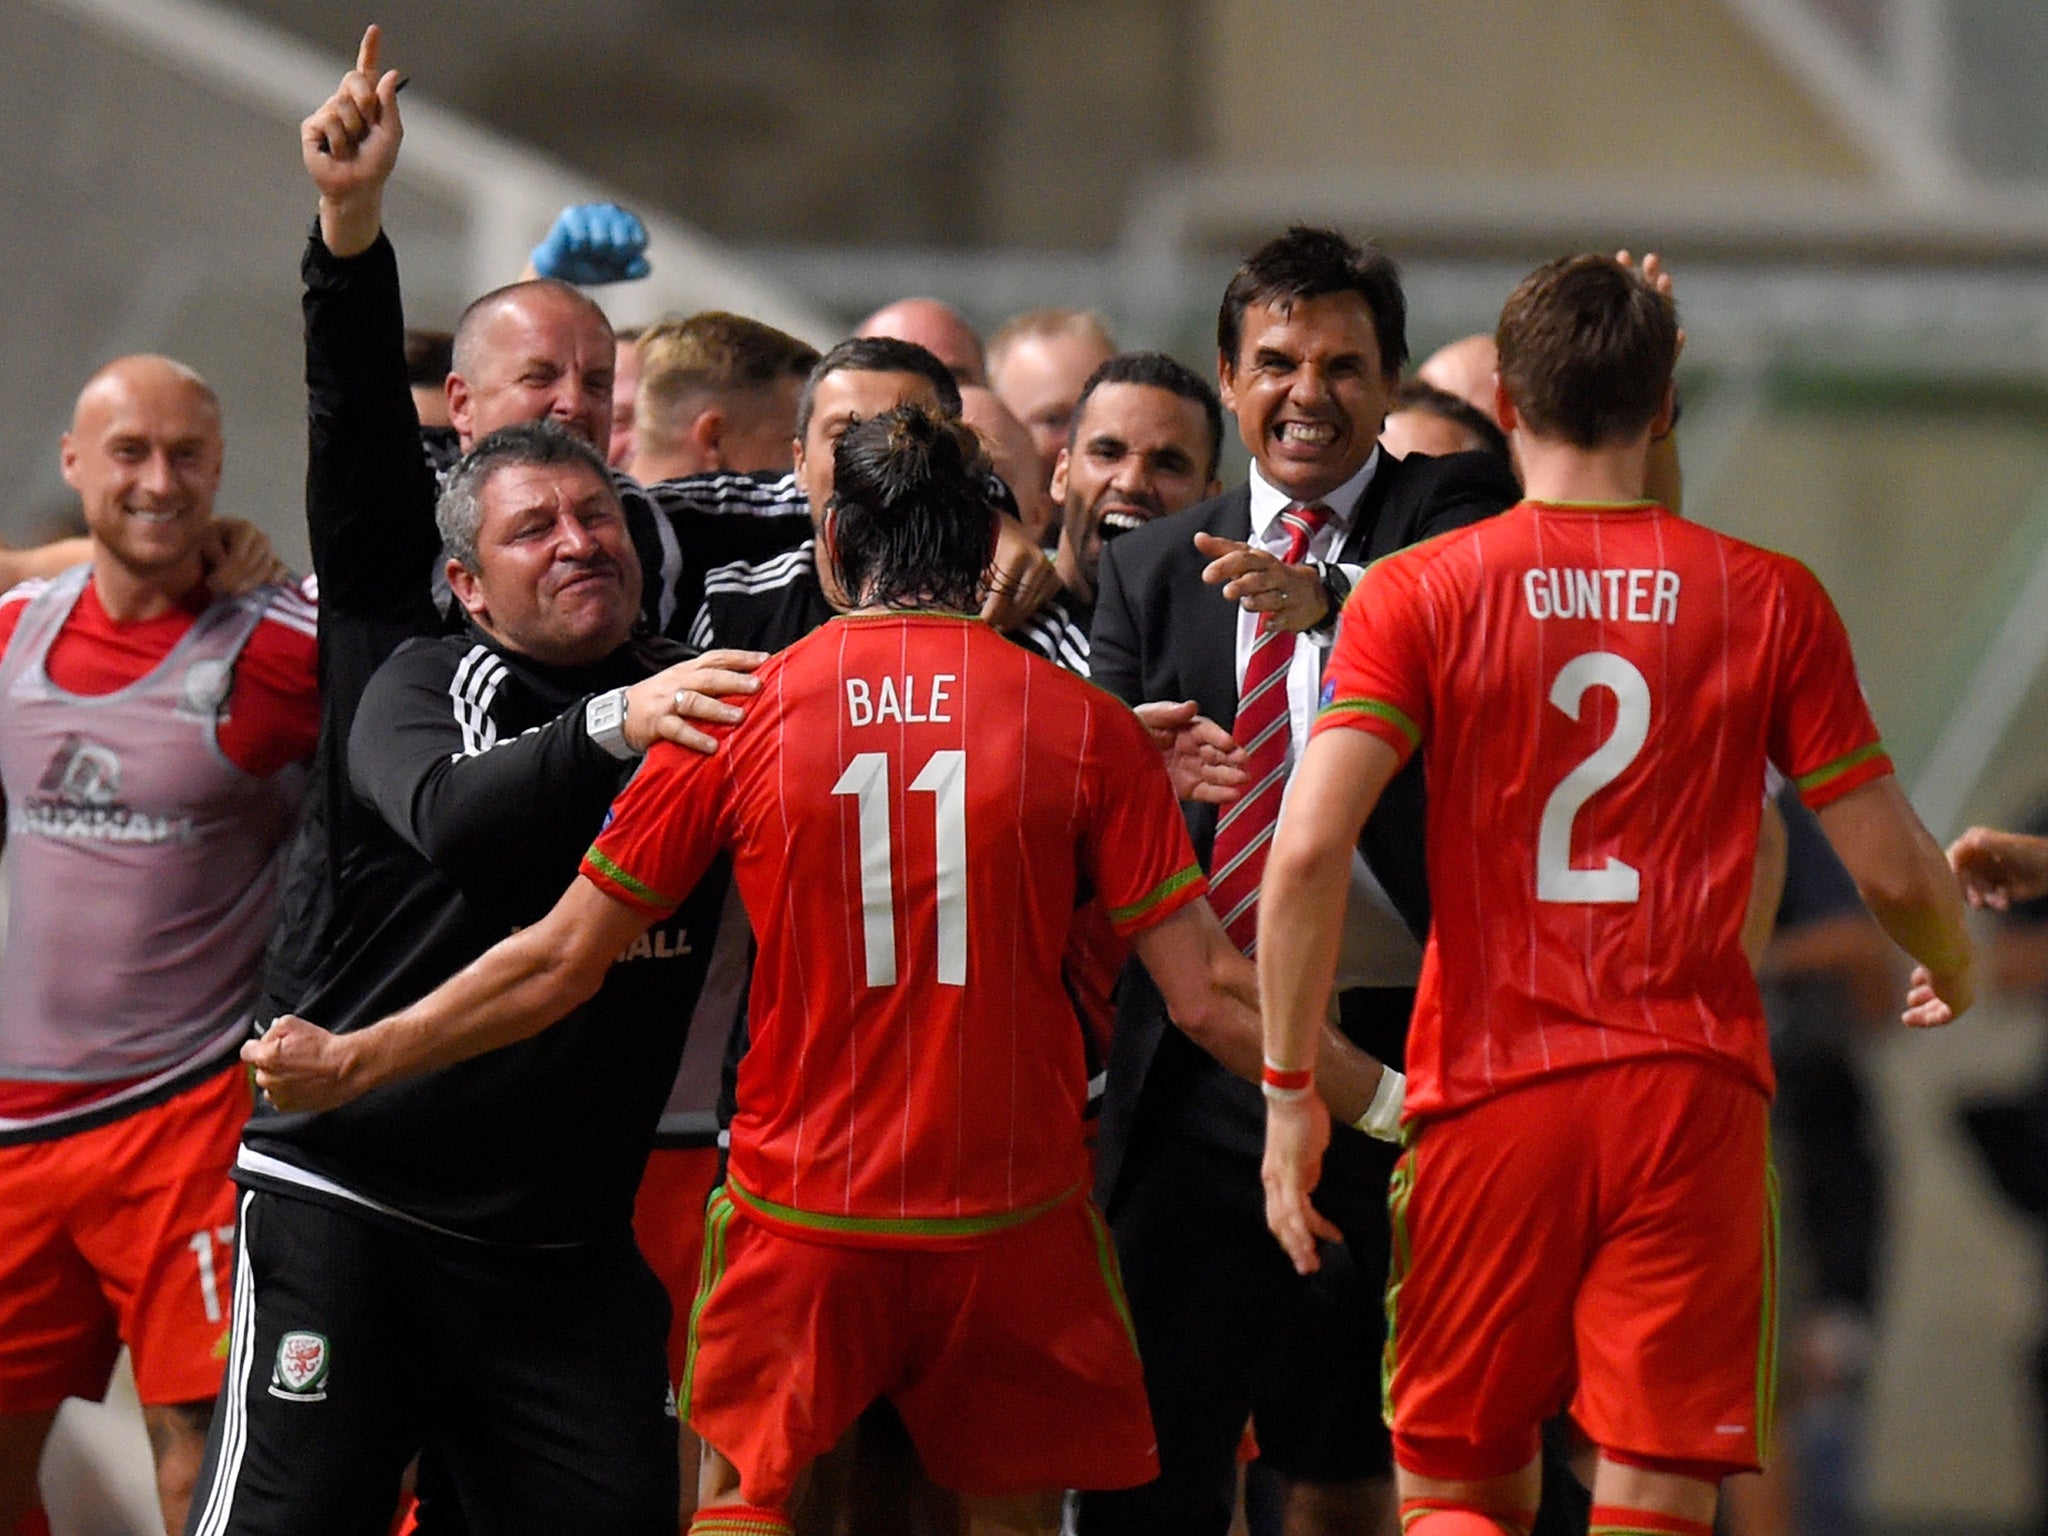 Gareth Bale celebrates with the Wales bench after scoring the winner against Cyprus